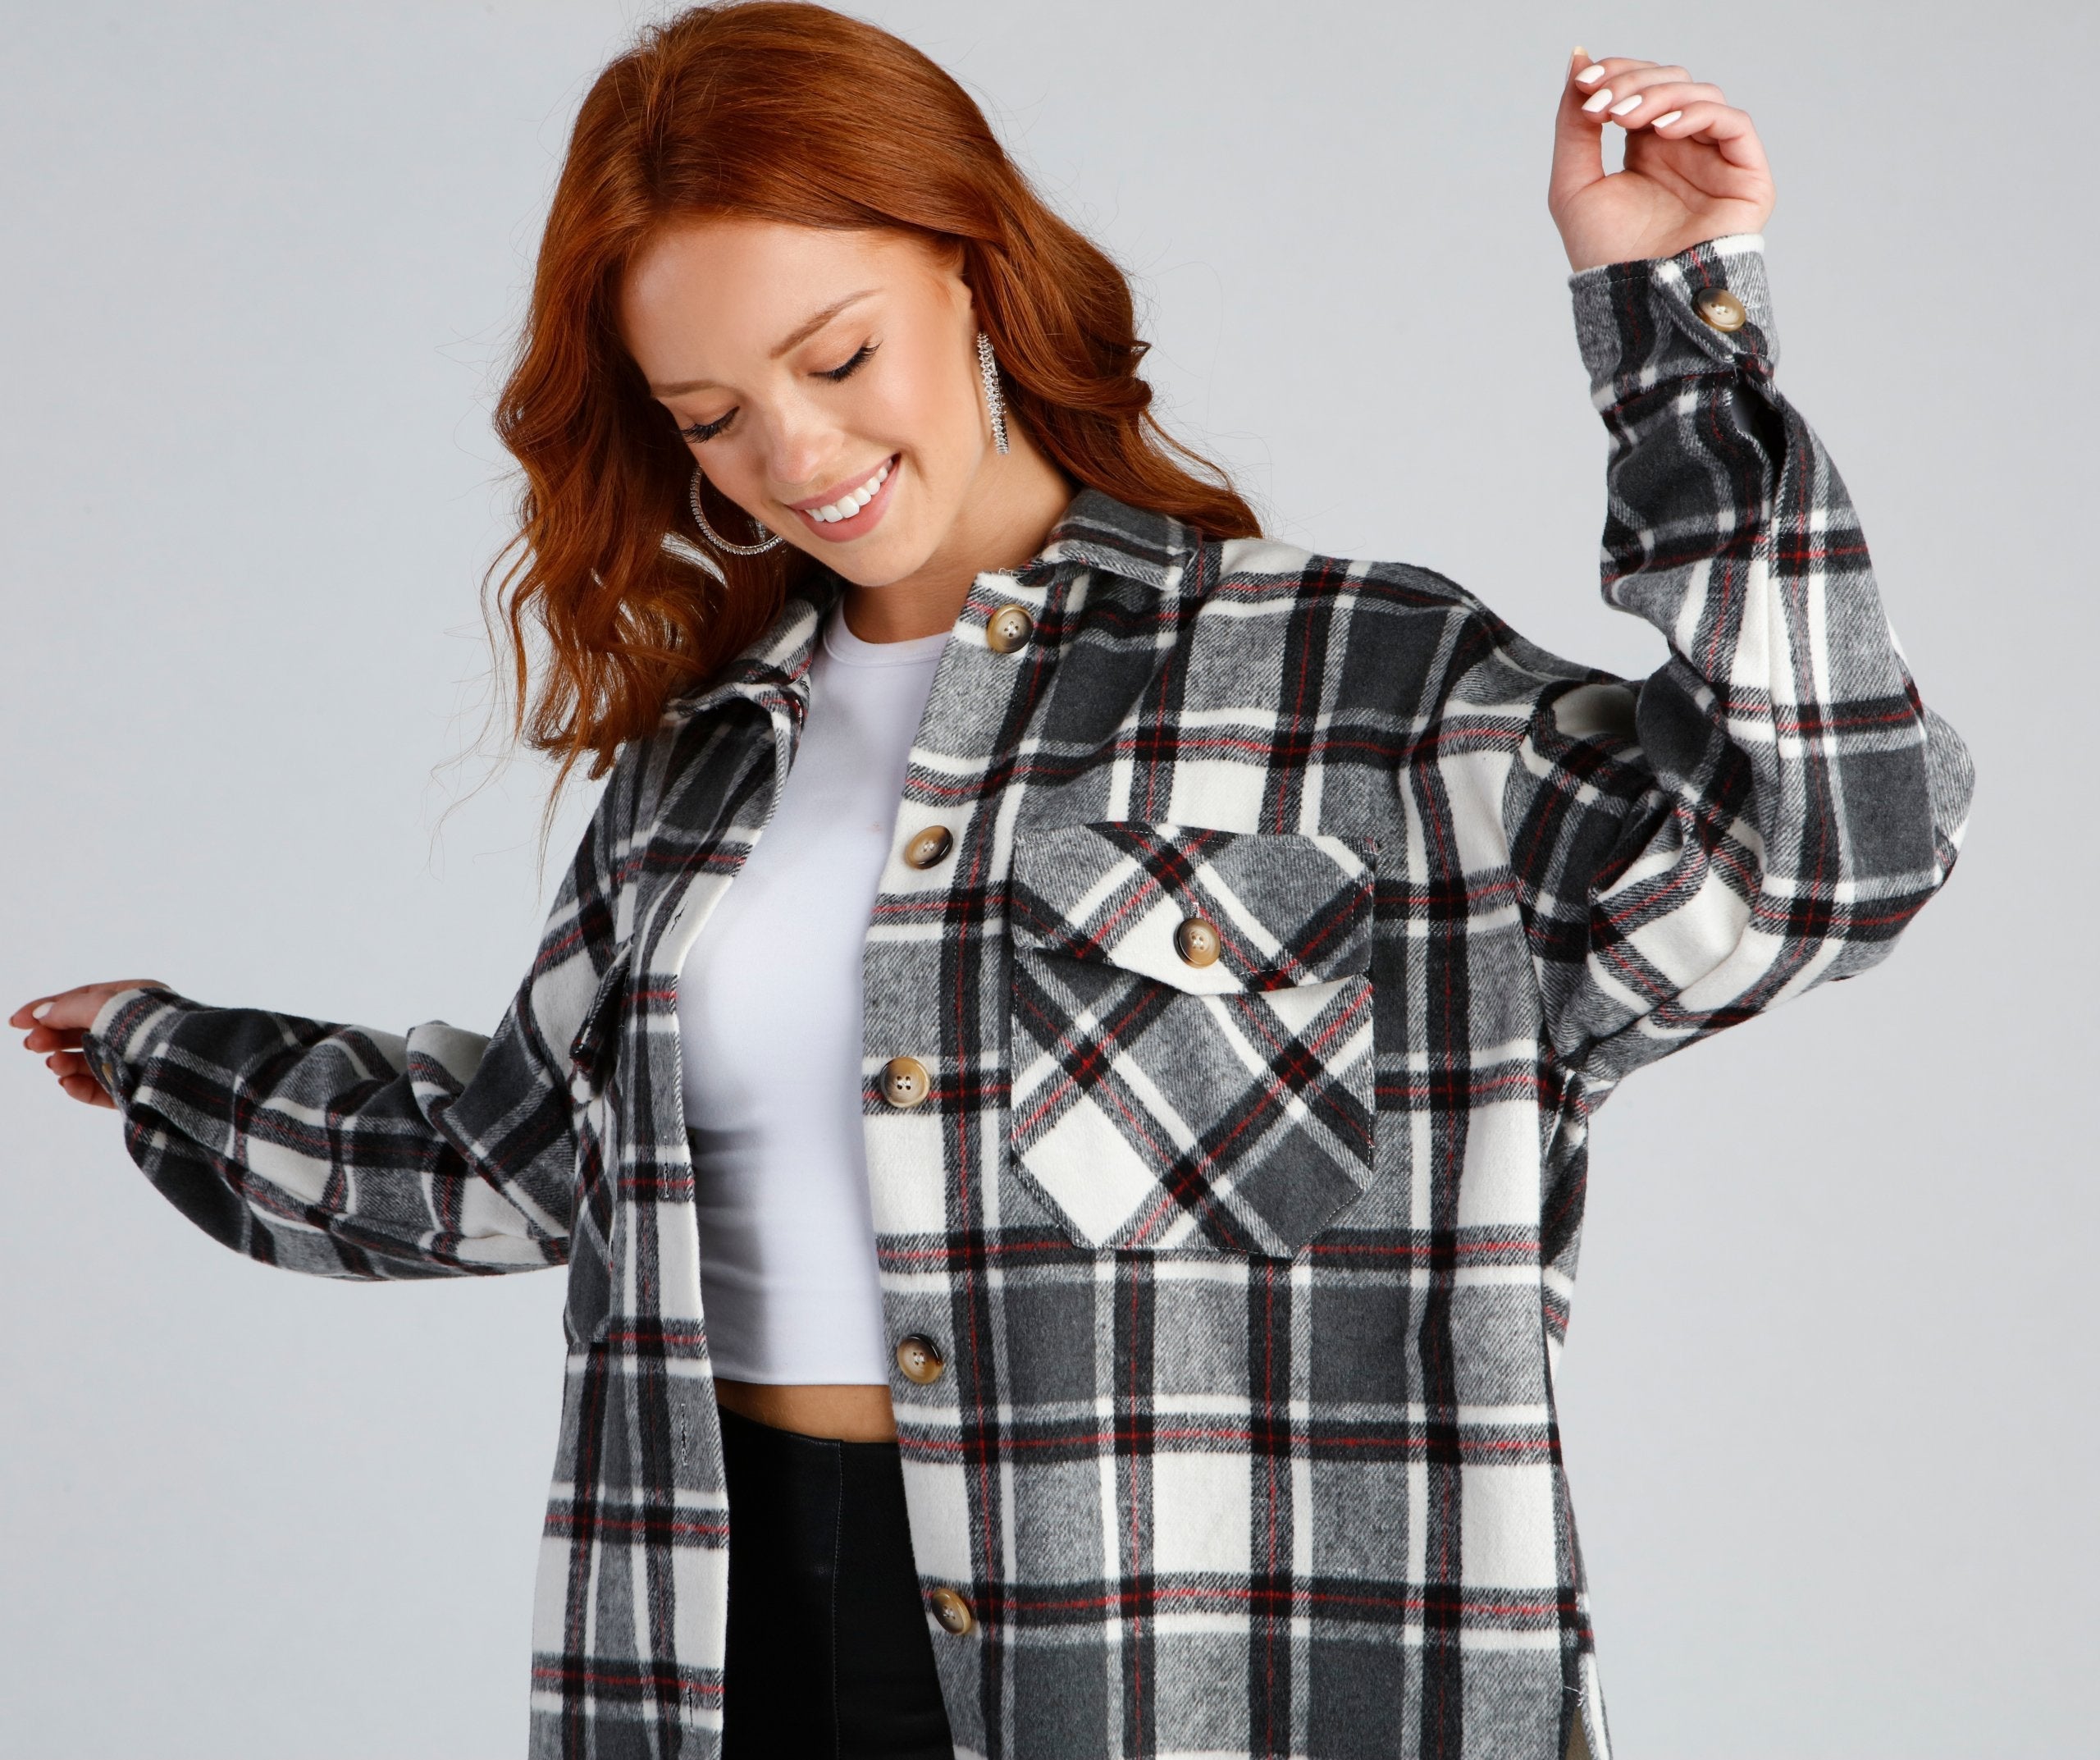 Casual Vibes Only Plaid Shacket - Lady Occasions